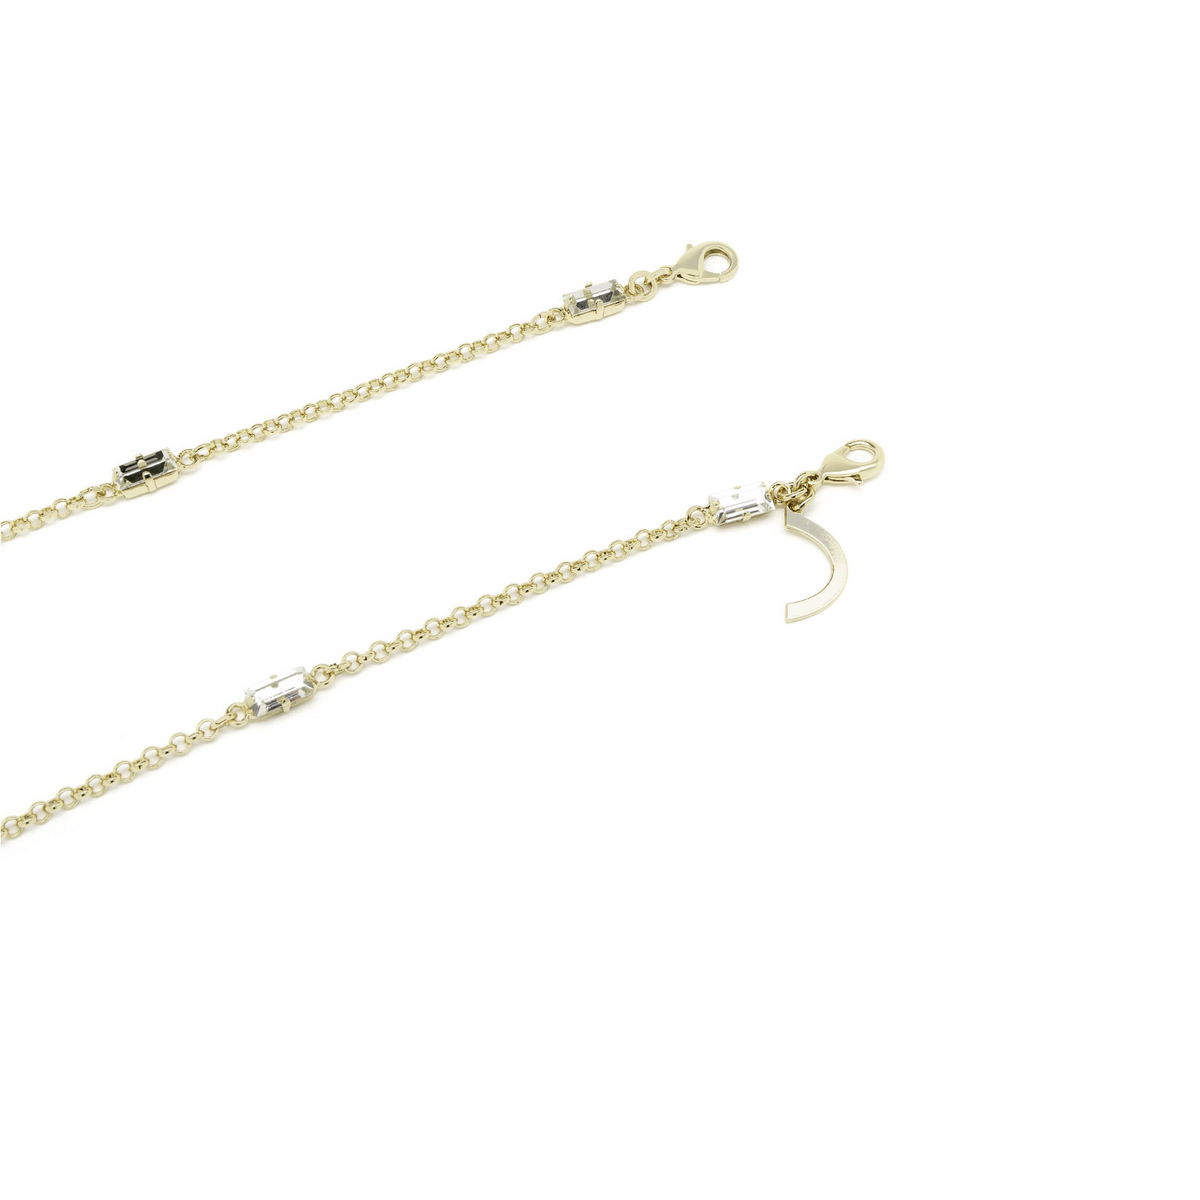 Huma BAGUETTE STRASS CHAIN S05 Gold S05 Gold - front view